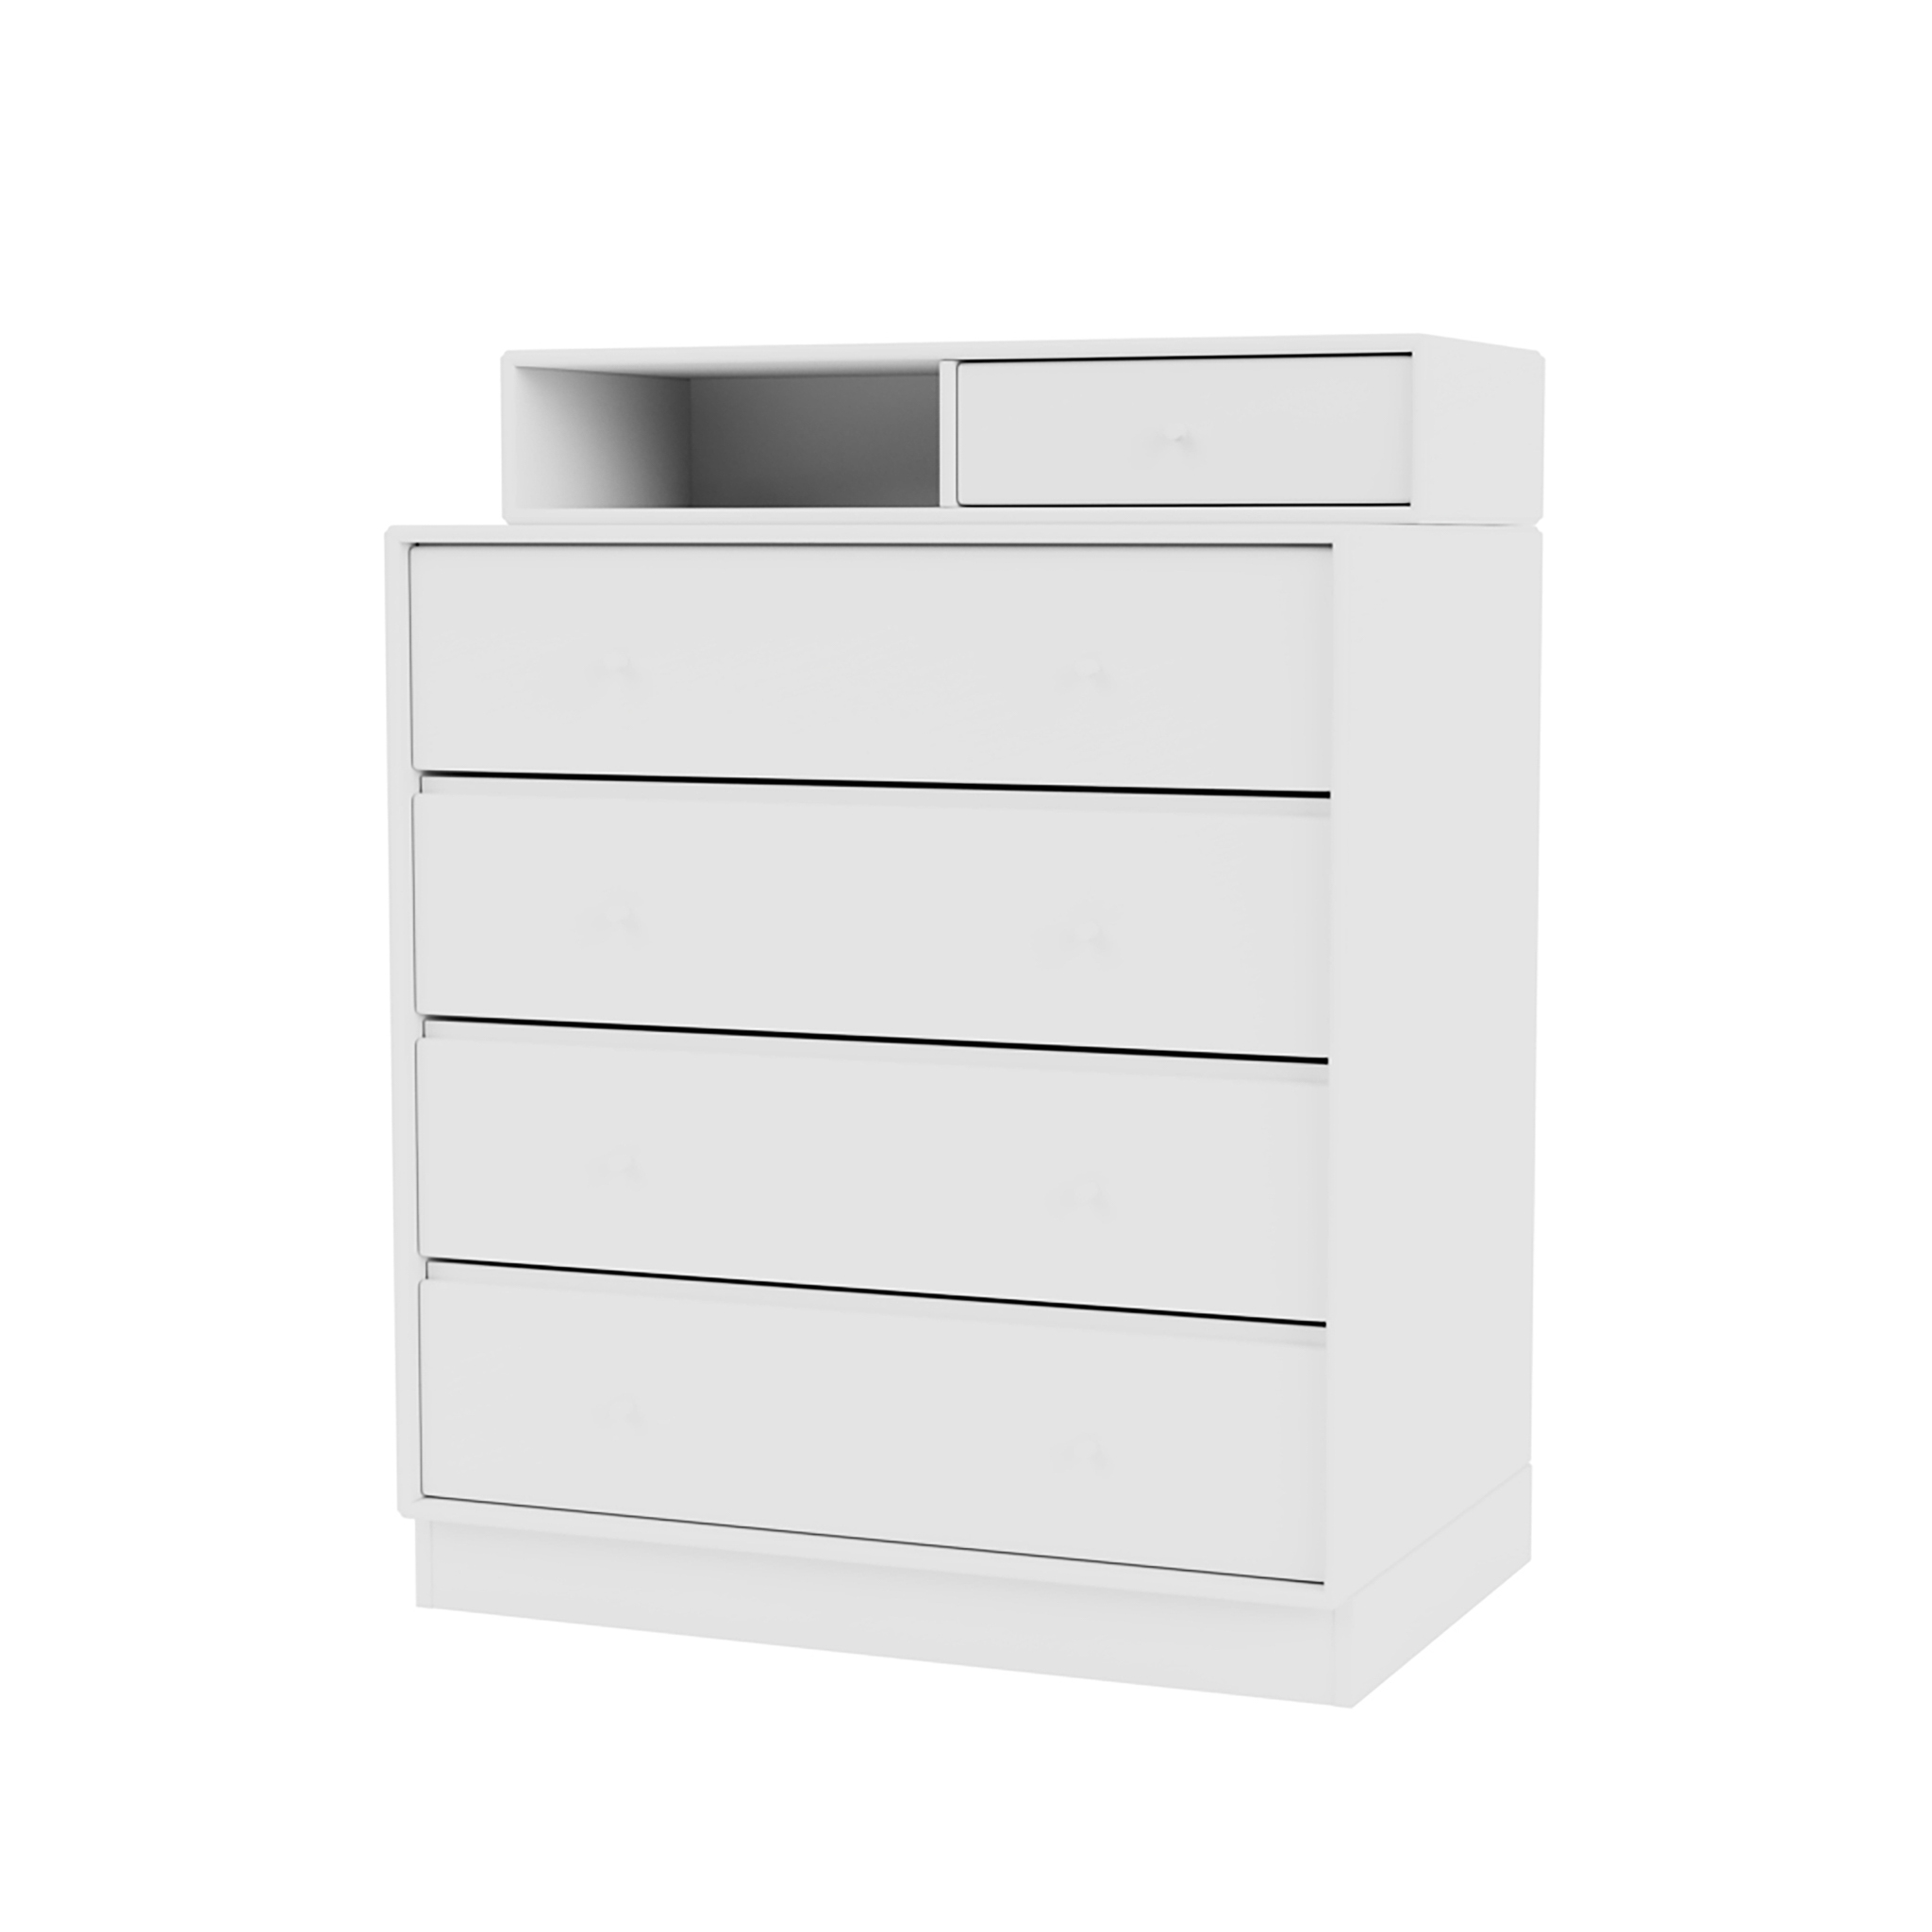 MONTANA // KEEP - JEWELRY AND CLOTHING CHEST | 101 NEW WHITE | PEDESTAL 7 CM